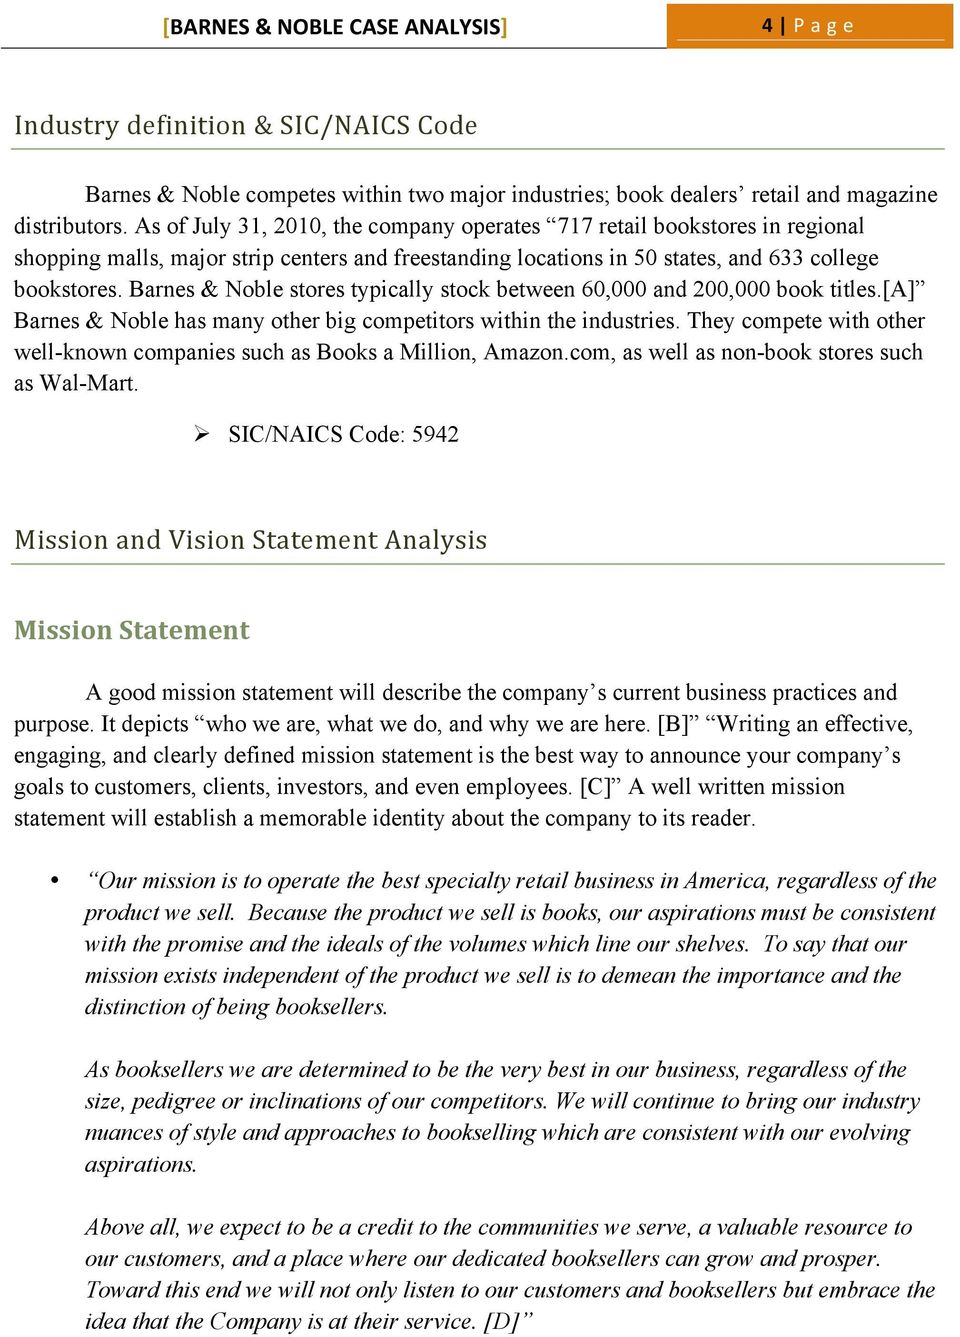 barnes and noble mission and vision statement